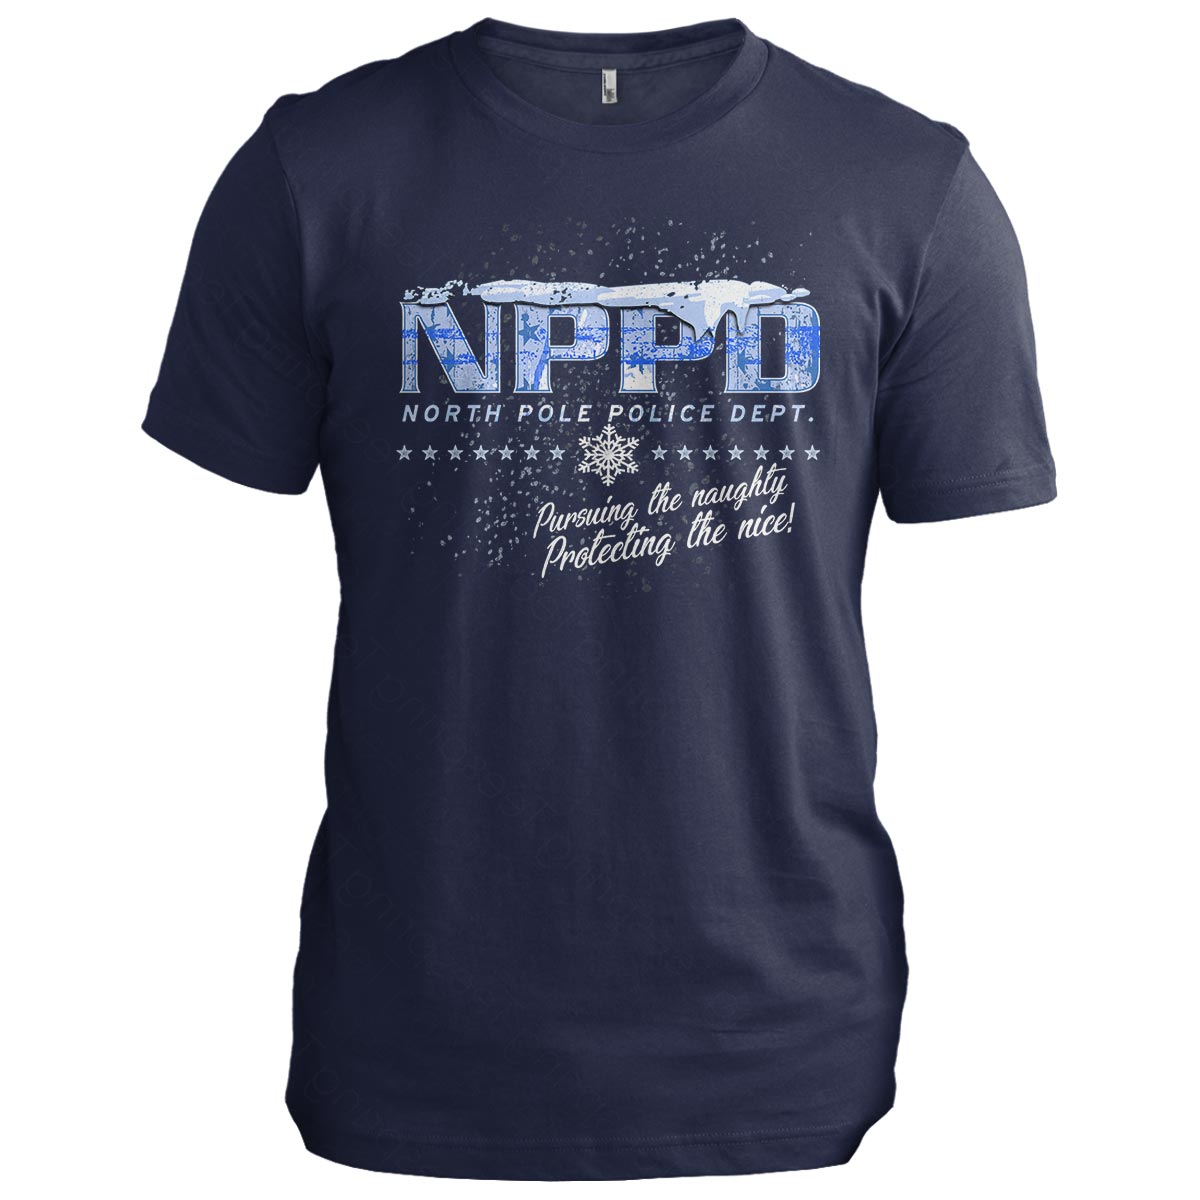 NPPD: North Pole Police Department